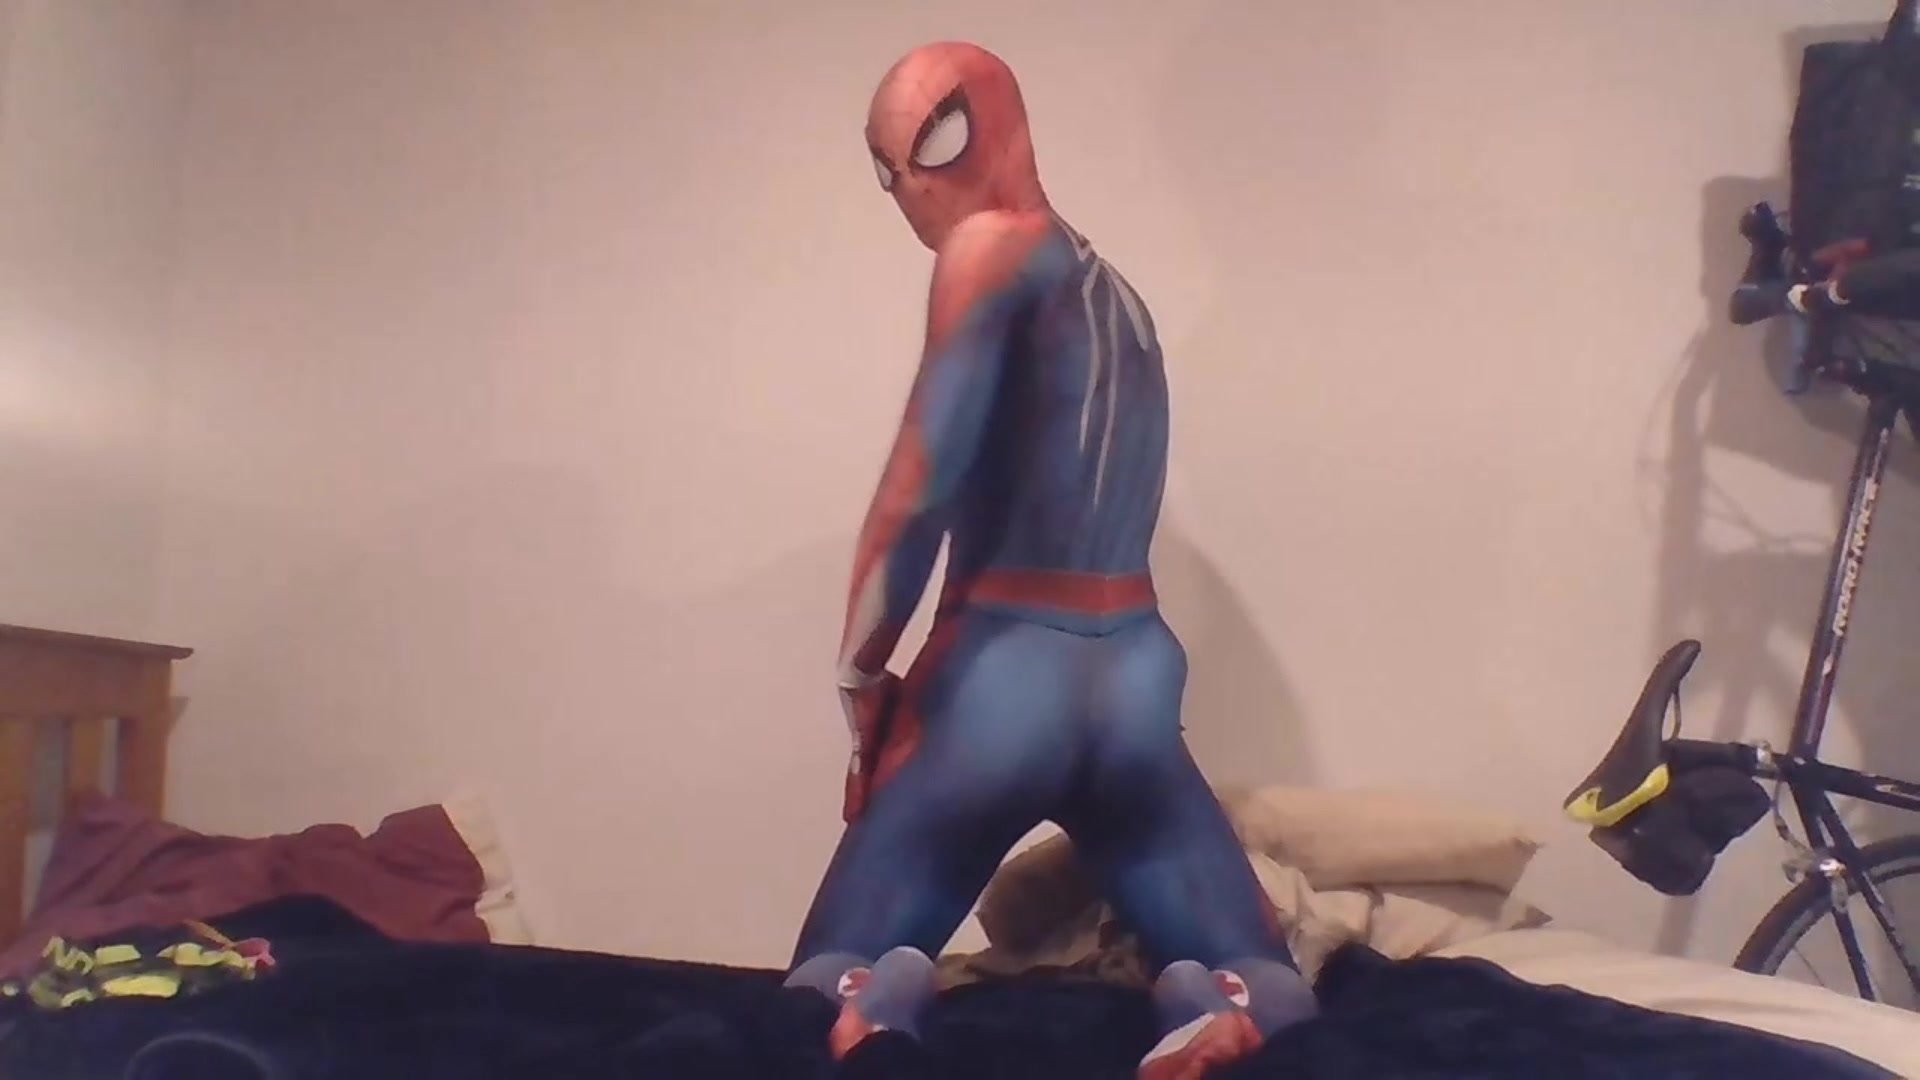 Spider Man Anal - Muscle guy in spiderman suit (25-06-2020) - ThisVid.com